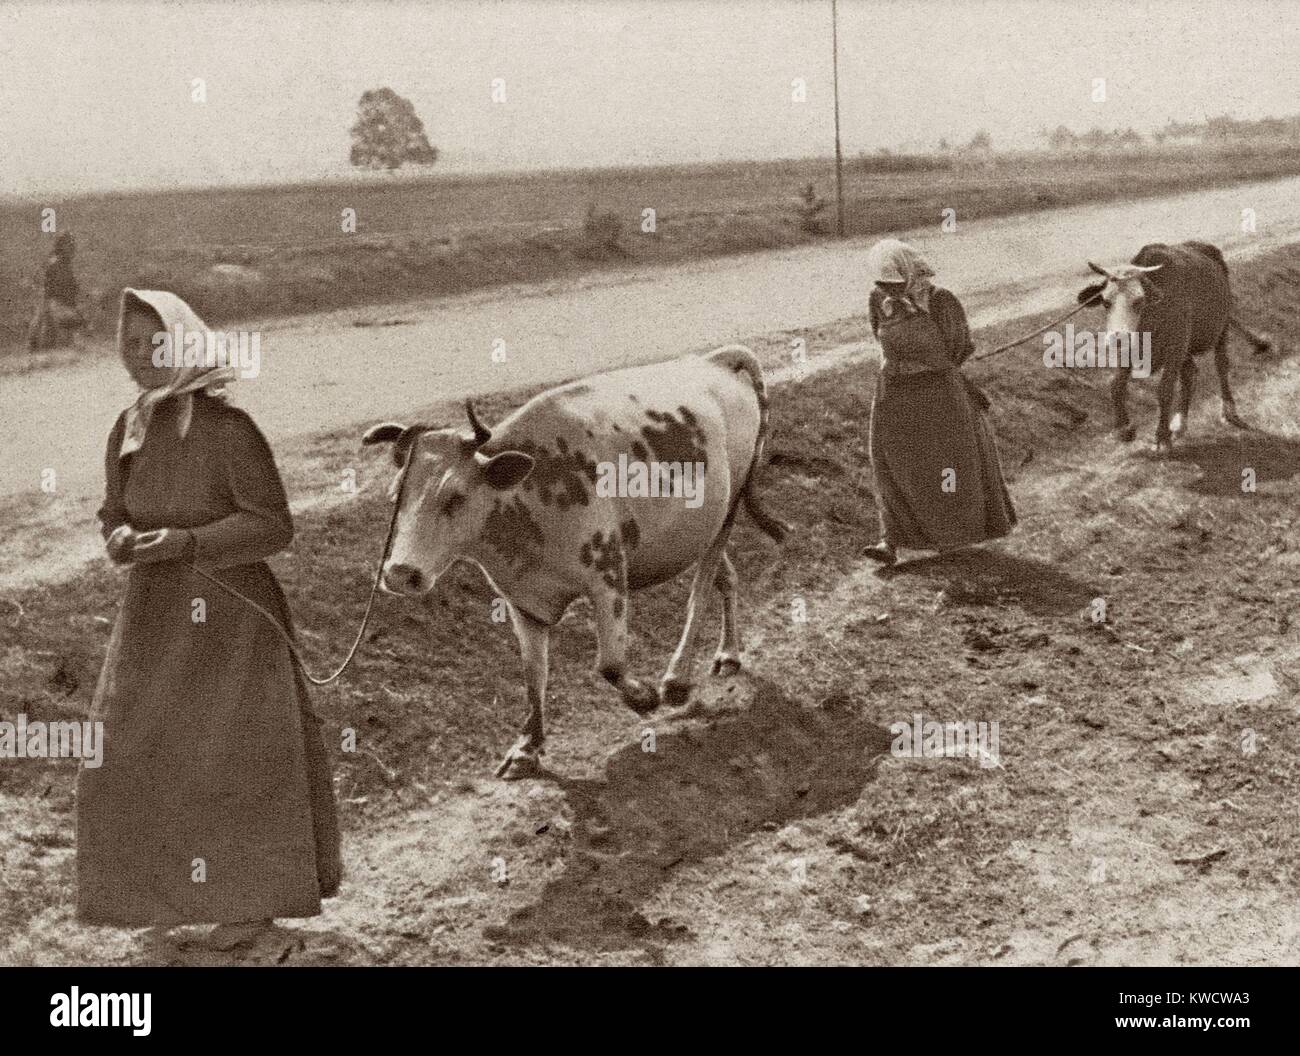 World War 1 in Eastern Europe. Refugee women from Warsaw, their homes in ruins, lead their cows in search for food and shelter. Ca. 1914-15. (BSLOC 2013 1 4) Stock Photo